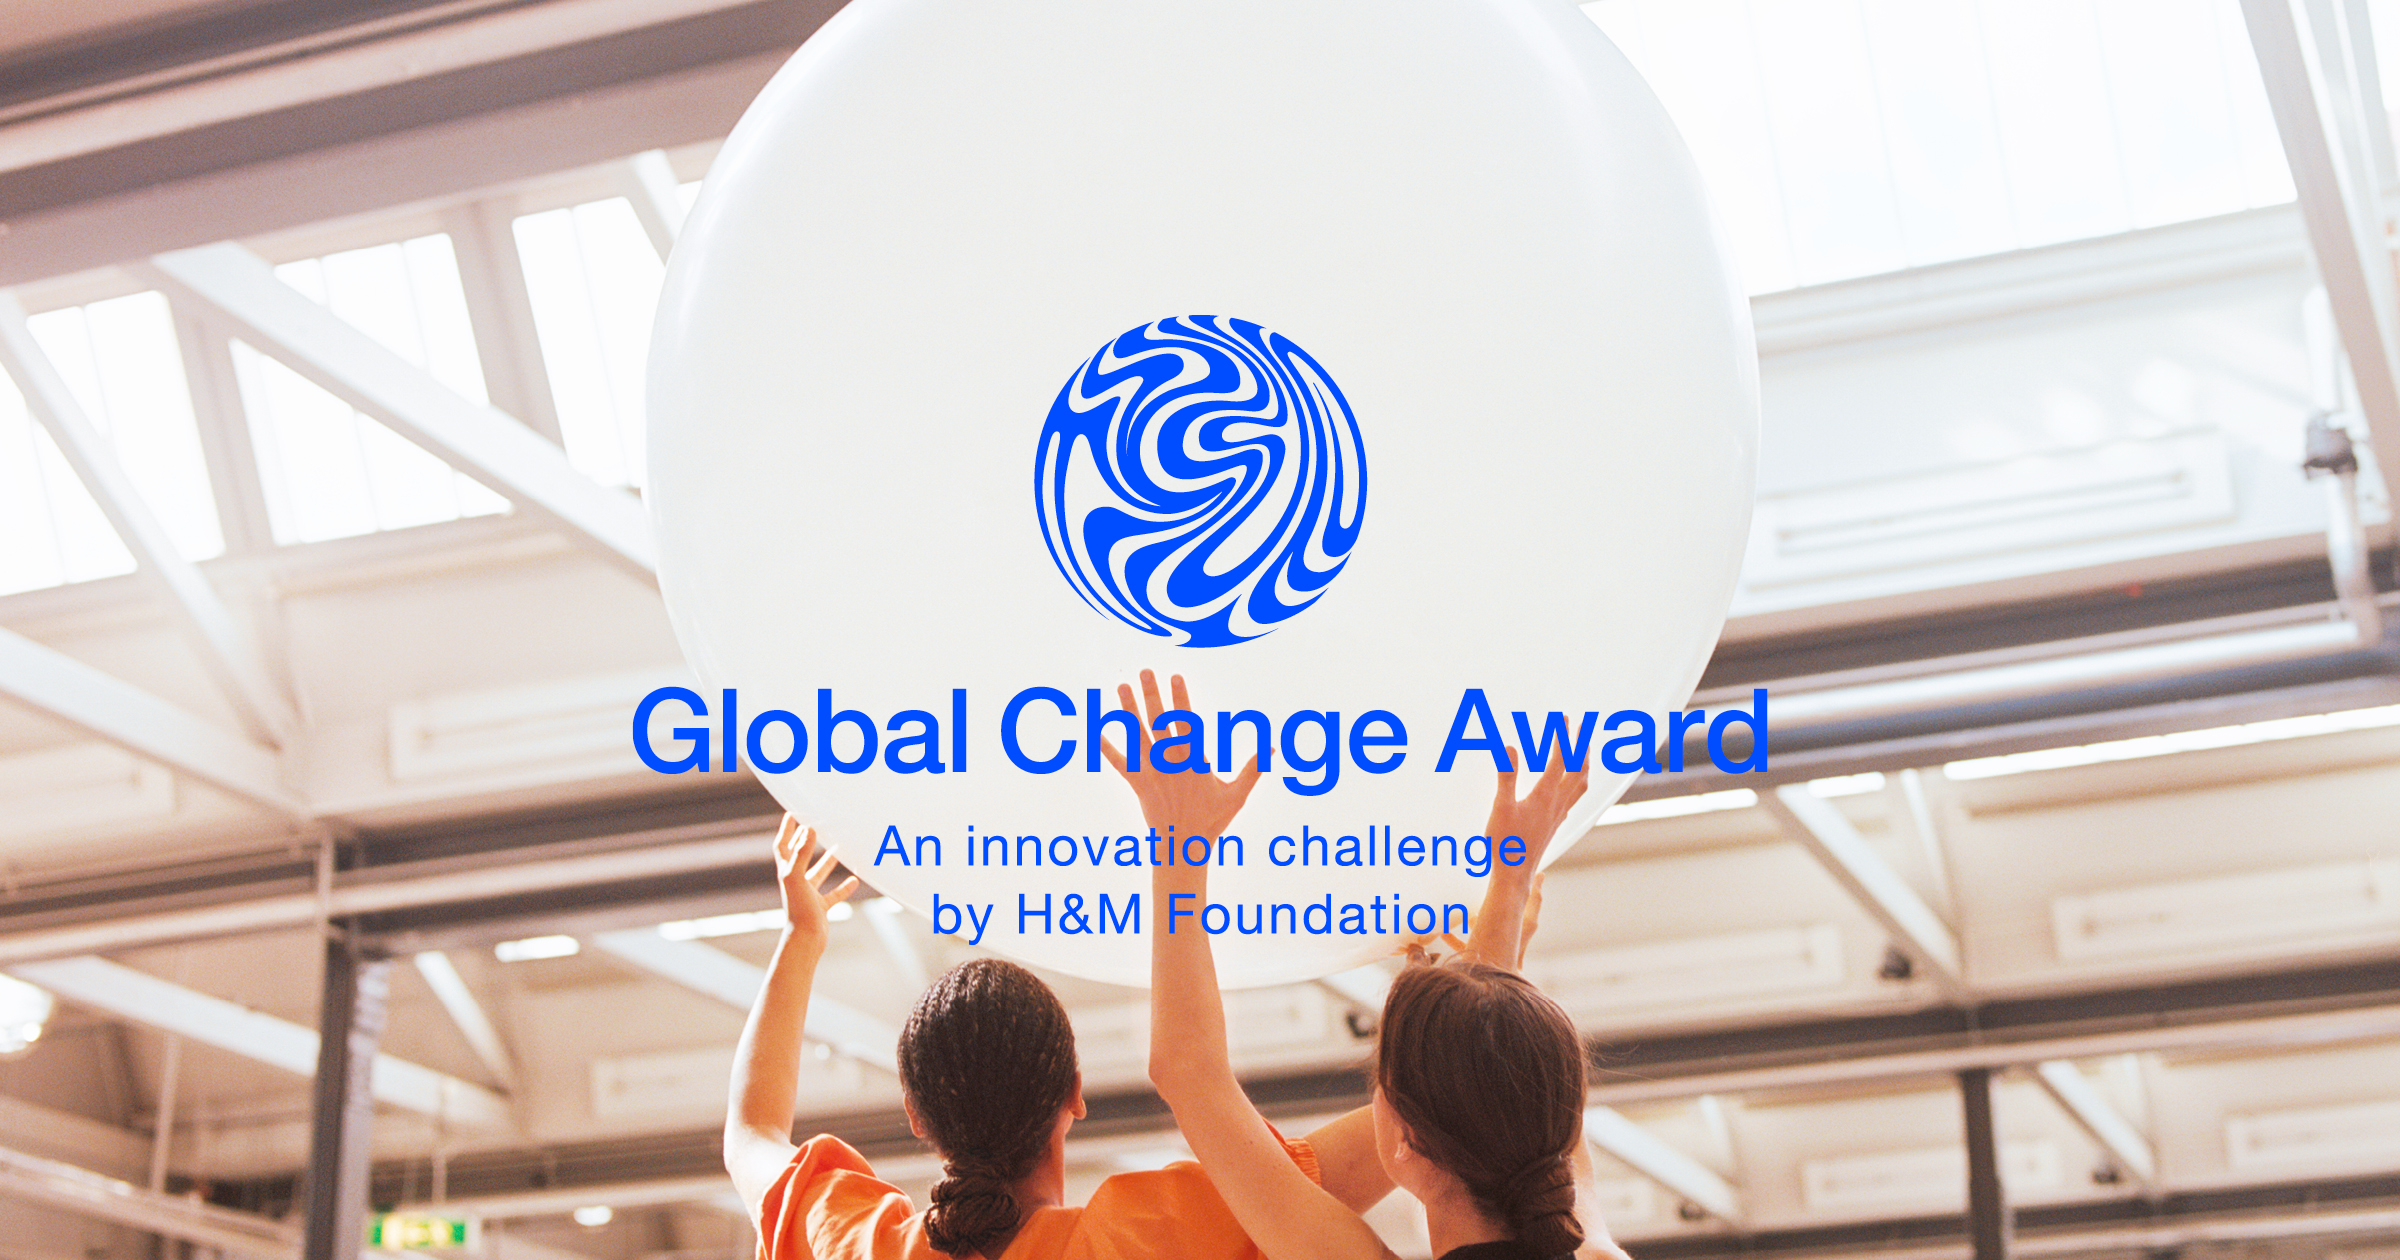 H&M Foundation Global Change Award 2023 (Win a share of 1 million euros)